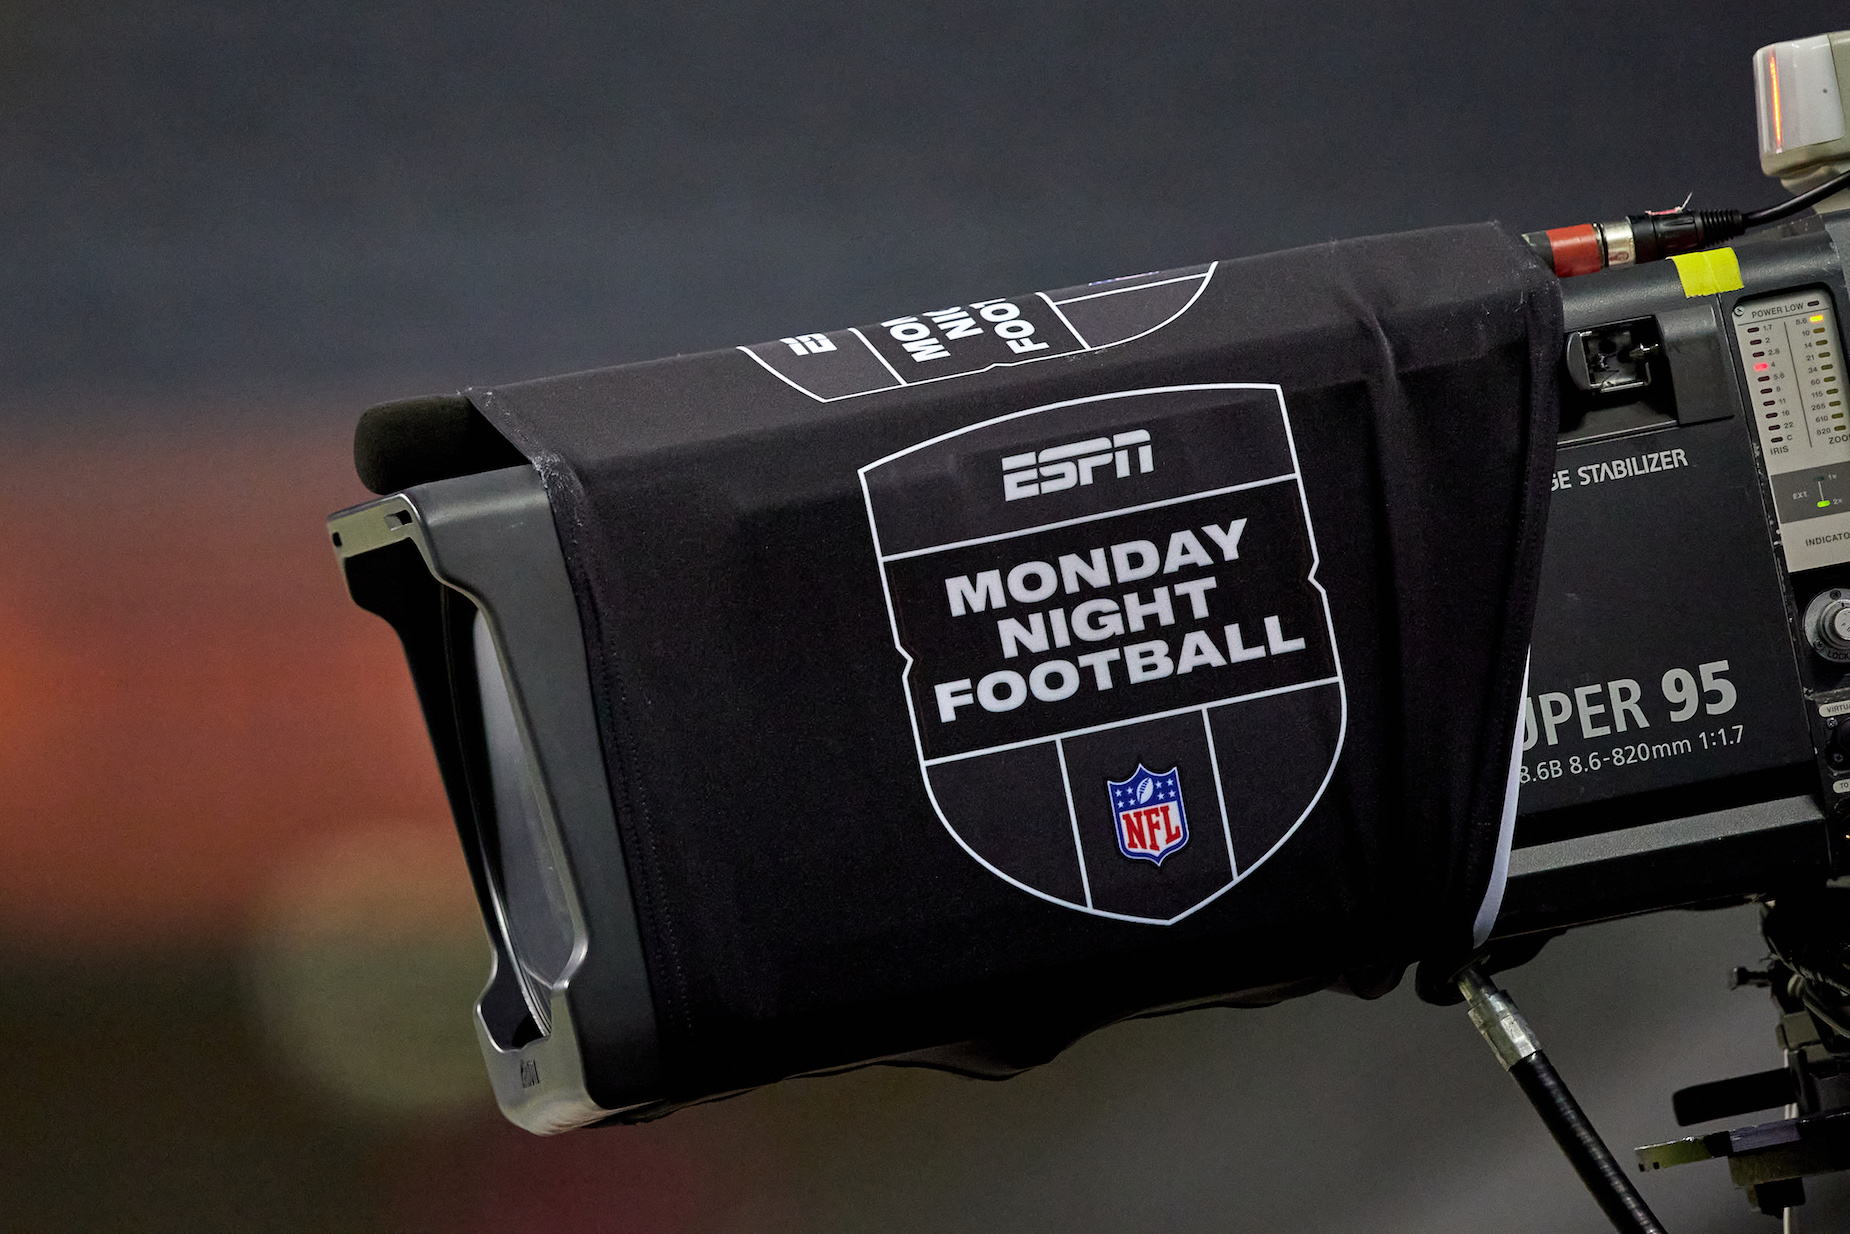 Why are there two Monday Night Football games during Week 13 of the NFL season?